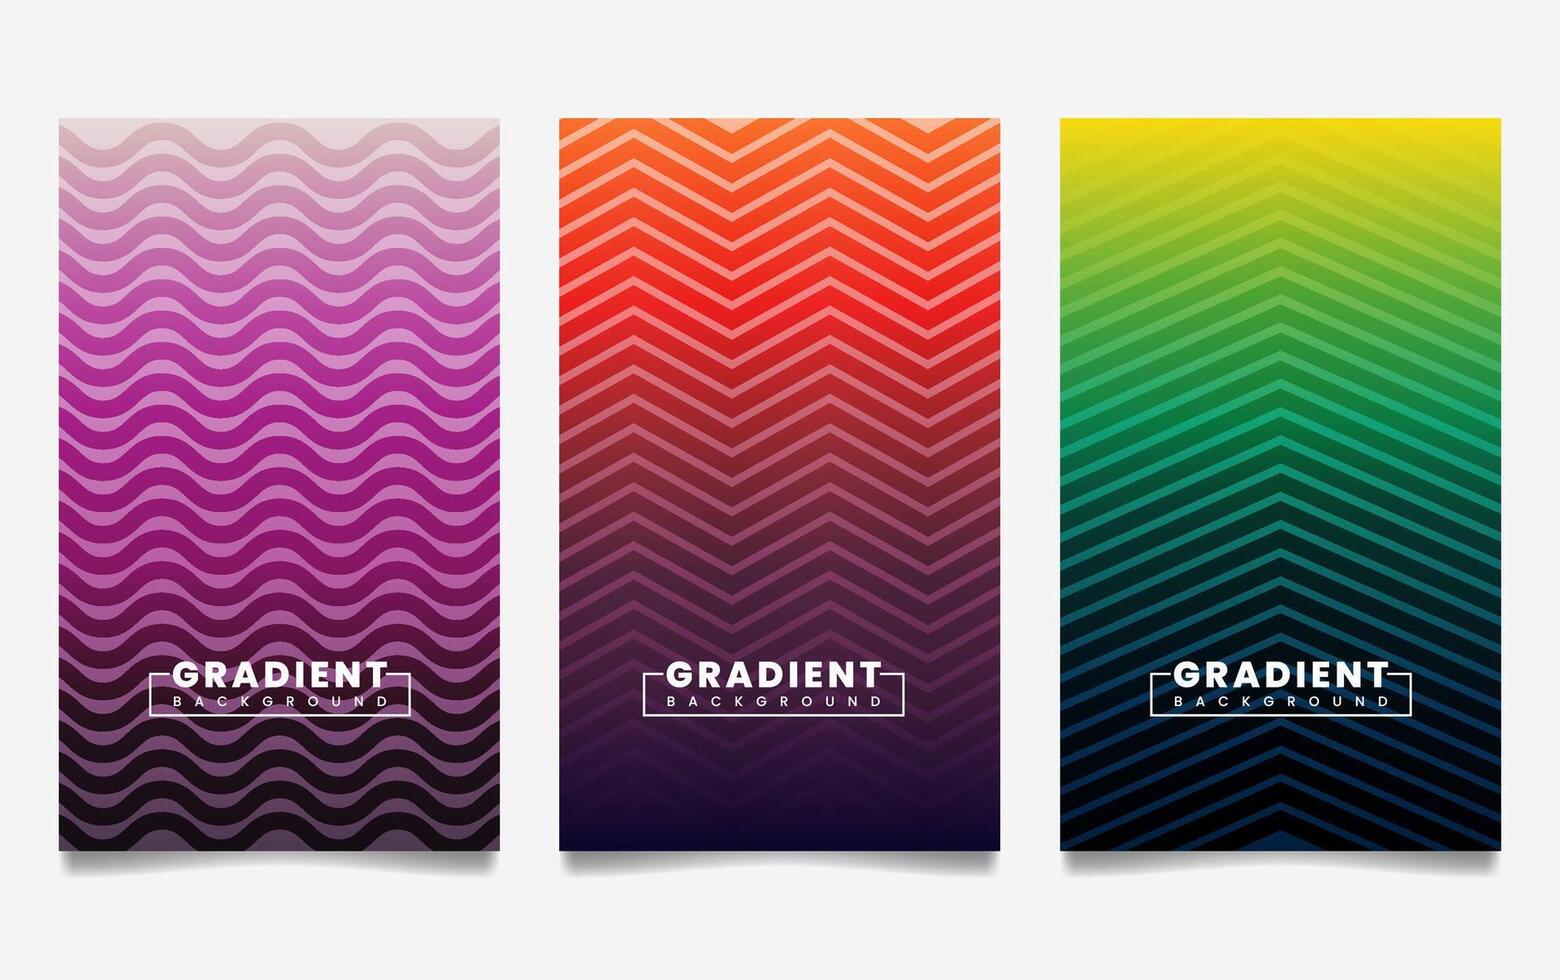 gradient backgrounds with line texture. For covers, wallpapers, branding, business cards, social media and other projects. vector